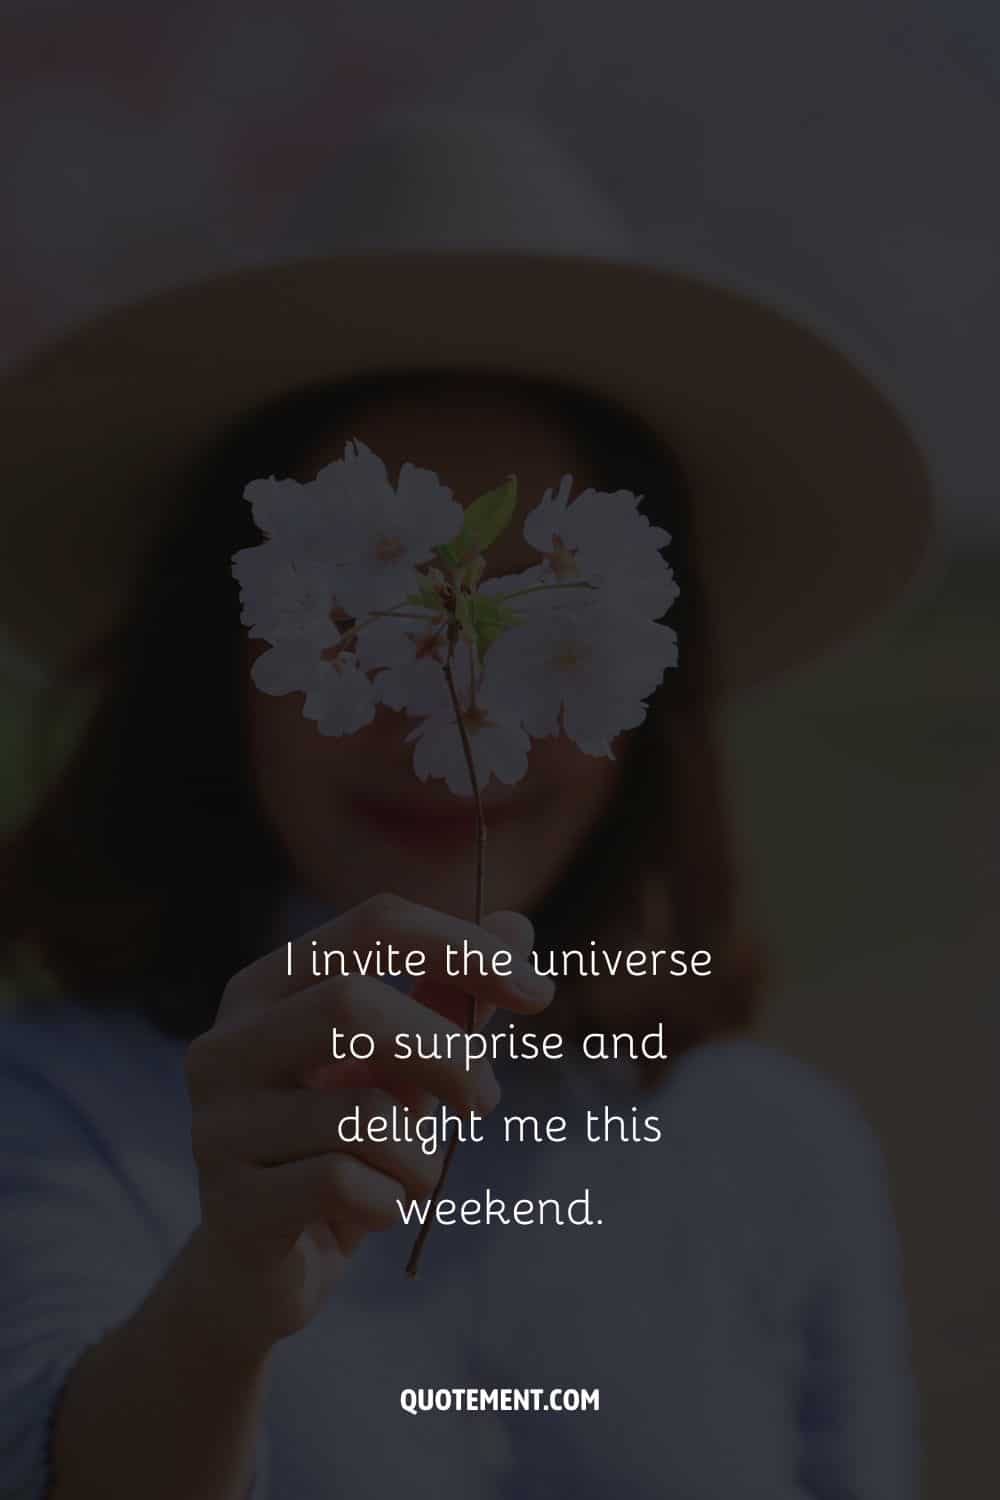 Image of a girl holding a flower representing affirmation for Saturday